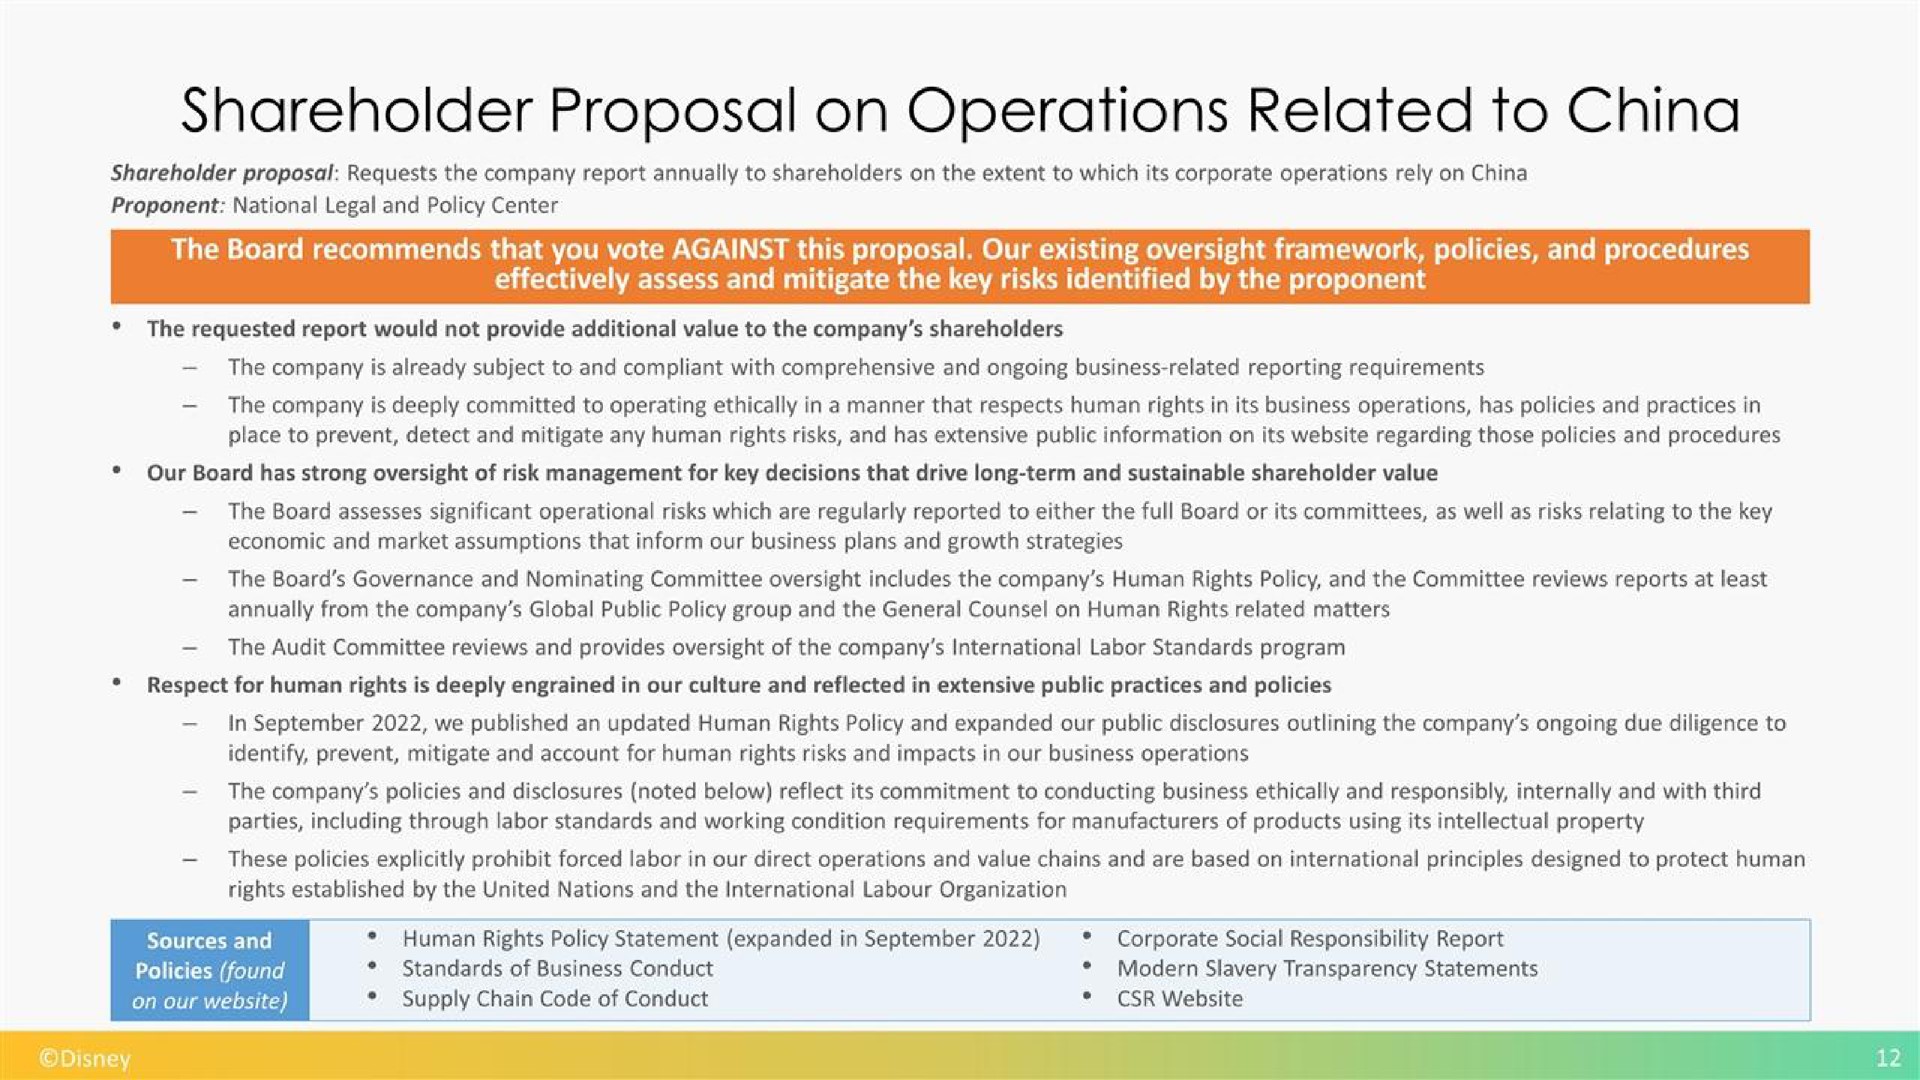 shareholder proposal on operations related to china | Disney